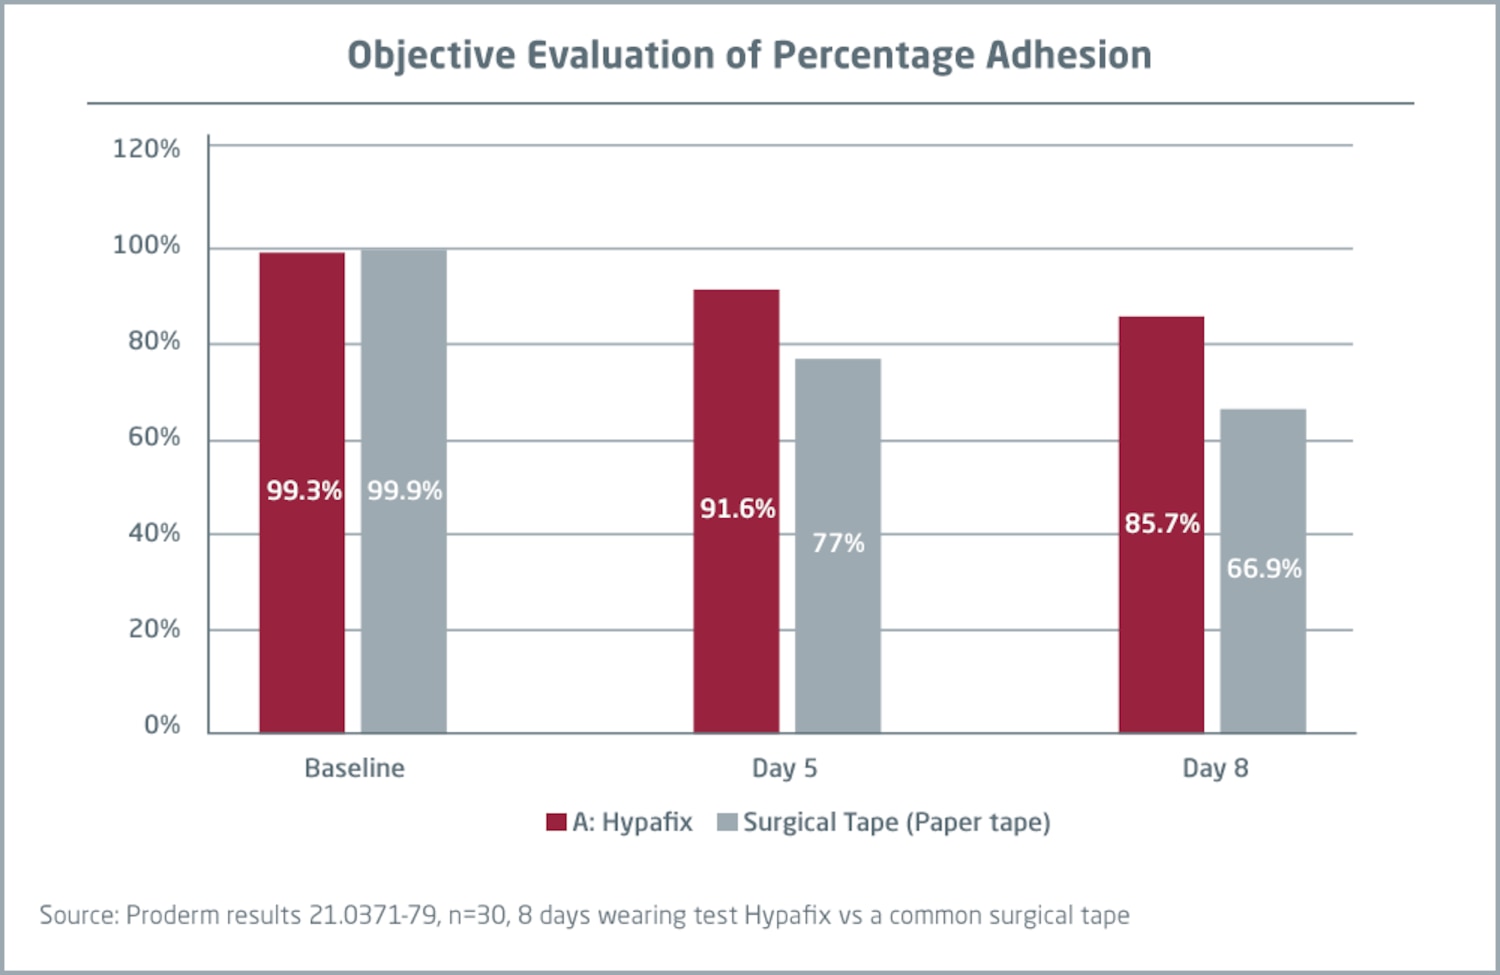 Bar graph comparing percentages of adhesion for Hypafix and surgical tape (paper tape) over 8 days (baseline, day 5 and day 8)